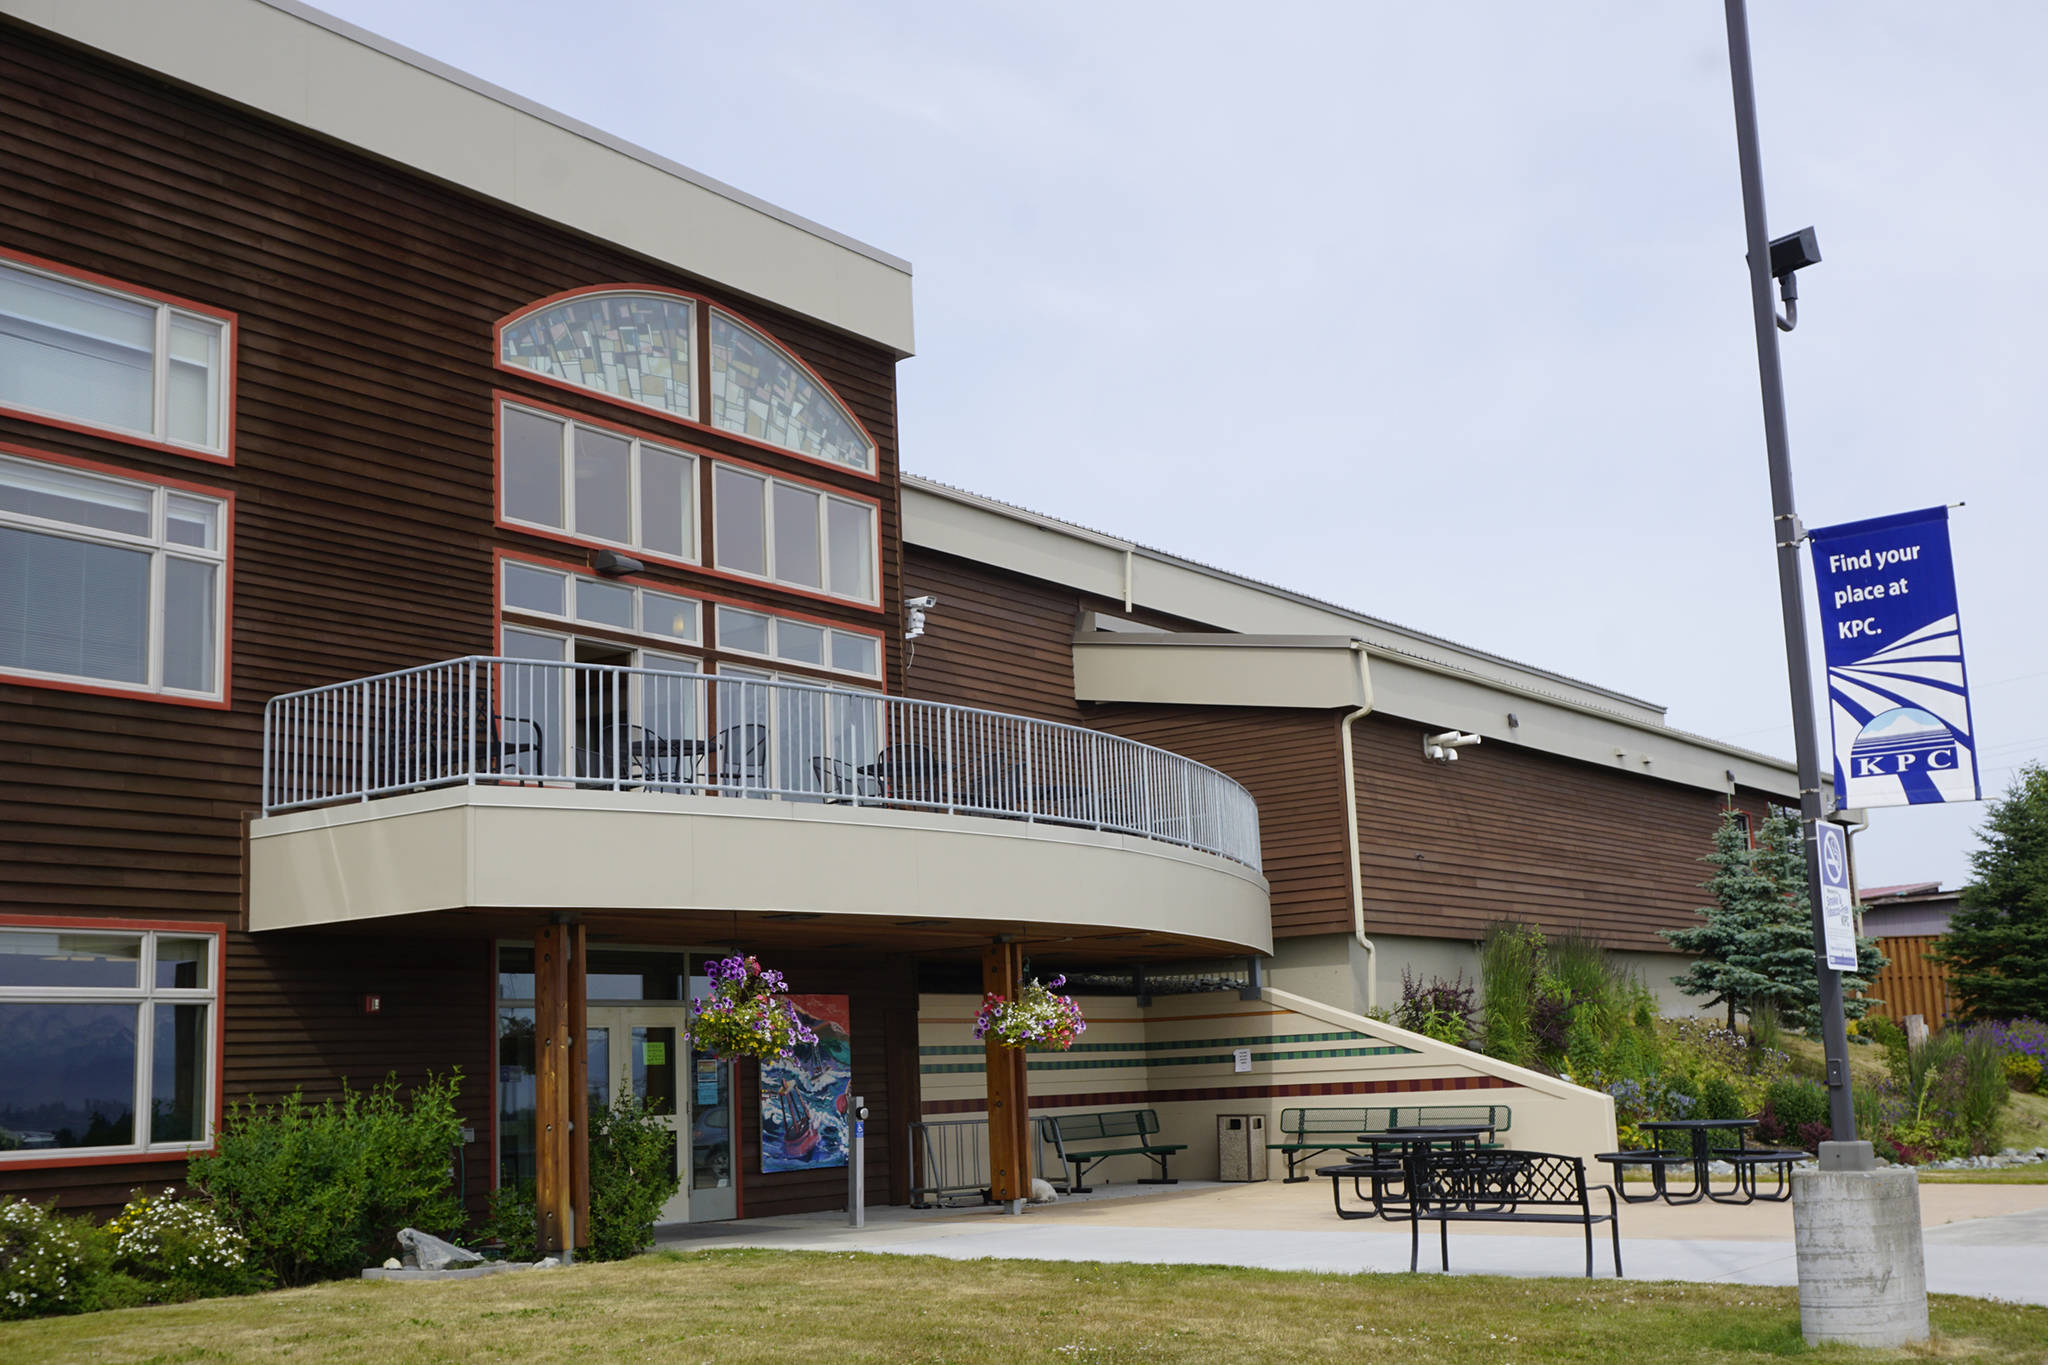 Pioneer Hall at the Kachemak Bay Campus, Kenai Peninsula College, University of Alaska Anchoarge, as seen on July 2, 2019, in Homer, Alaska. (Photo by Michael Armstrong/Homer News)